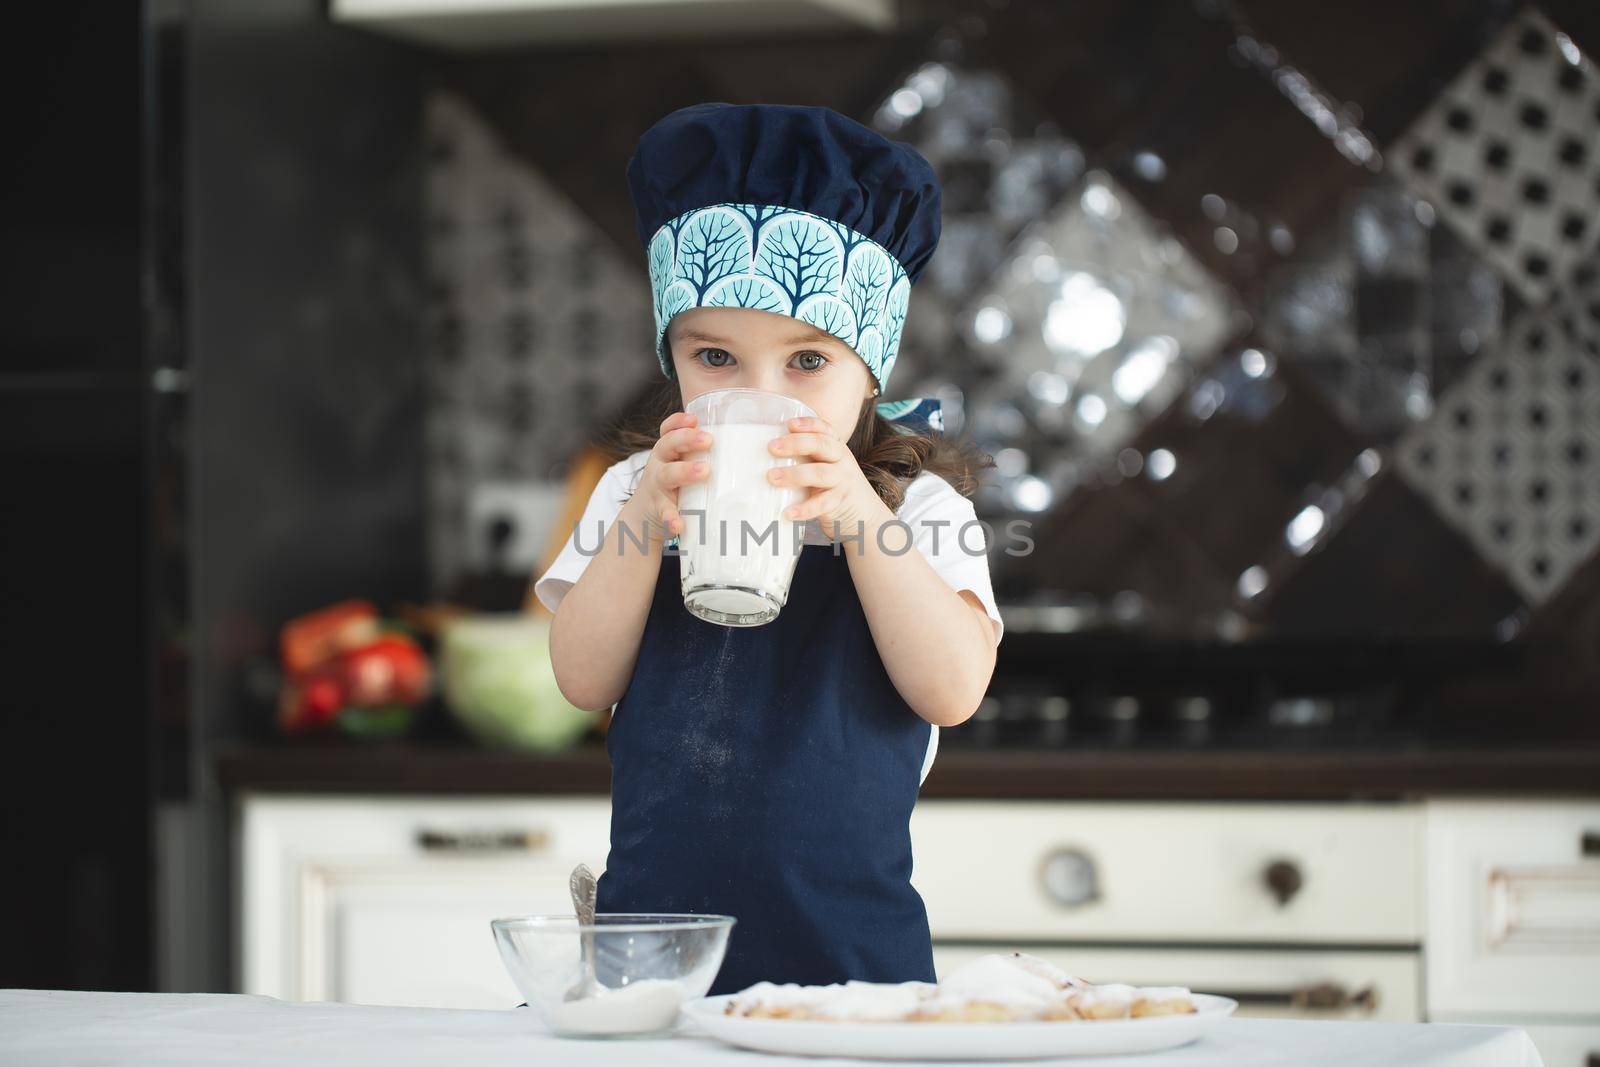 Small girl in the kitchen in an apron and a Chef's hat is drinking milk from a glass glass.